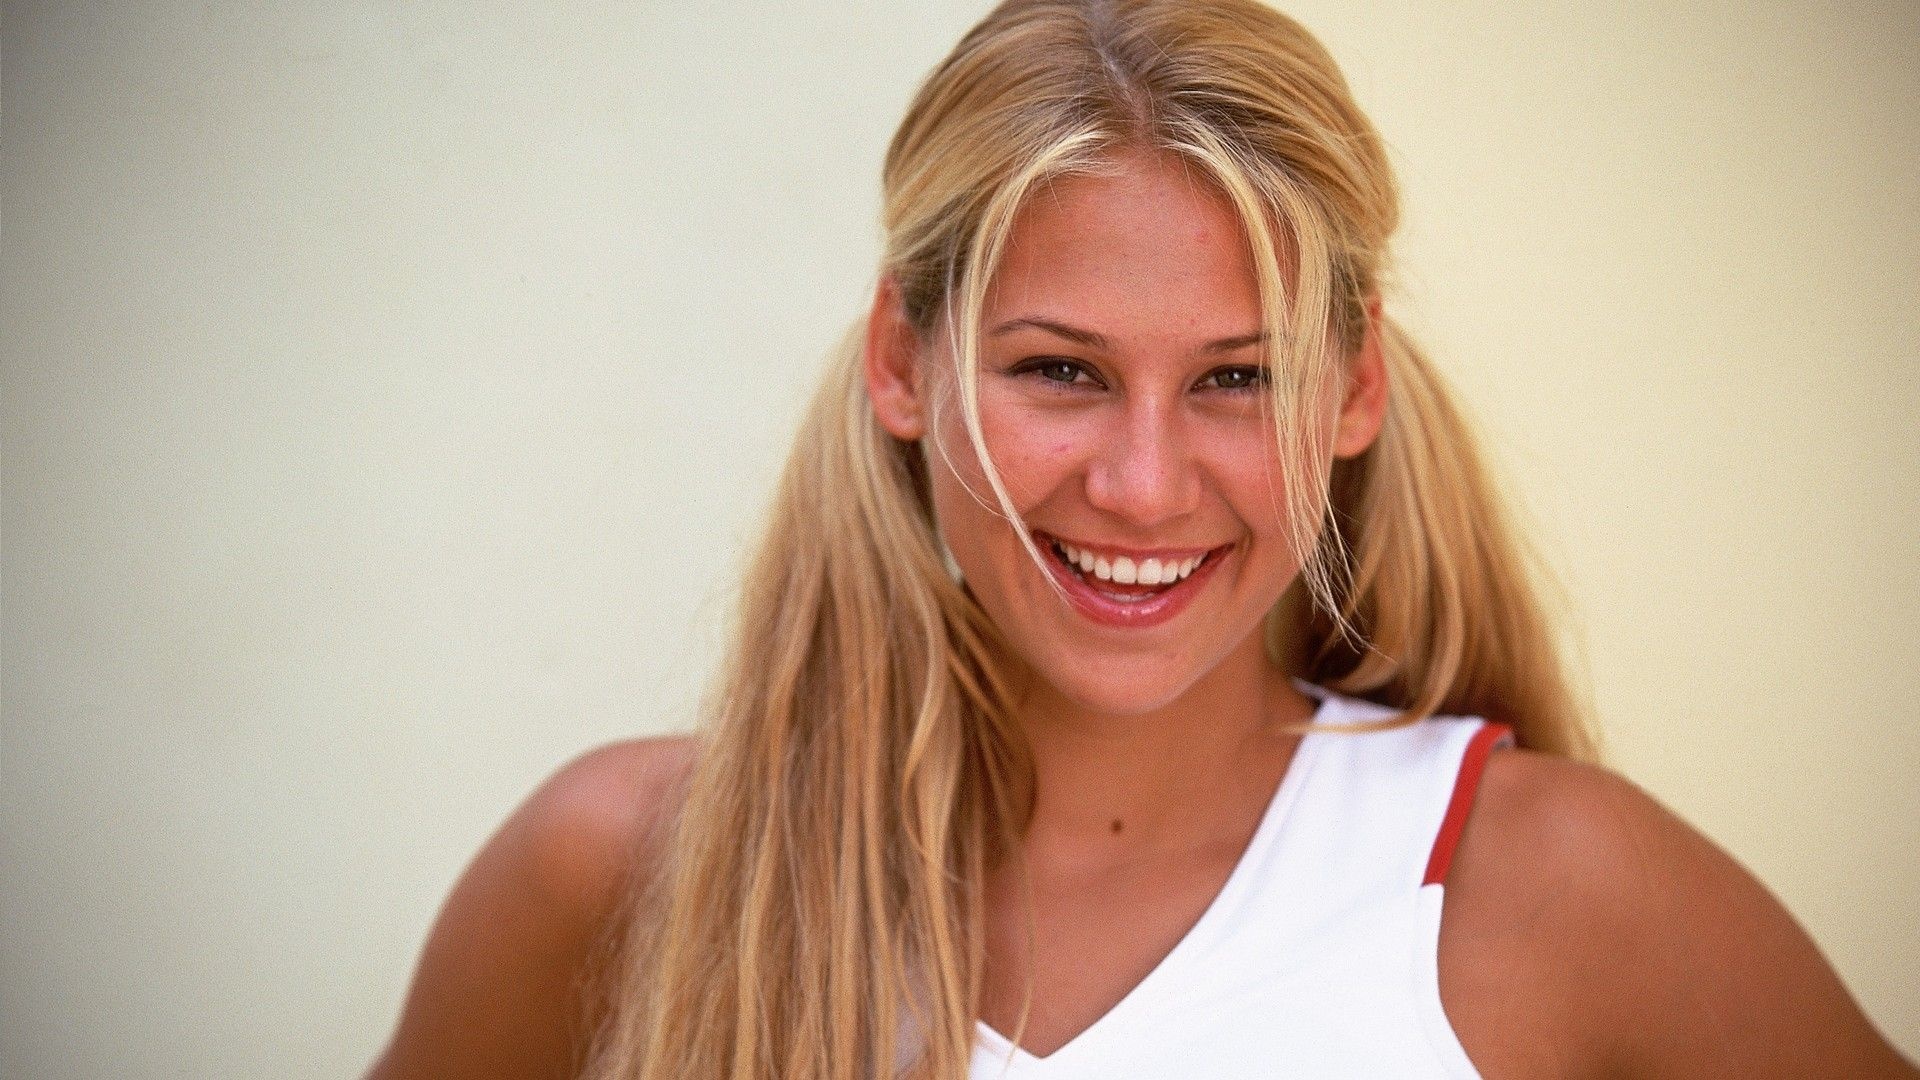 Anna Kournikova: Achieved her first Grand Slam match victory in two years at the Australian Open, 2003. 1920x1080 Full HD Wallpaper.